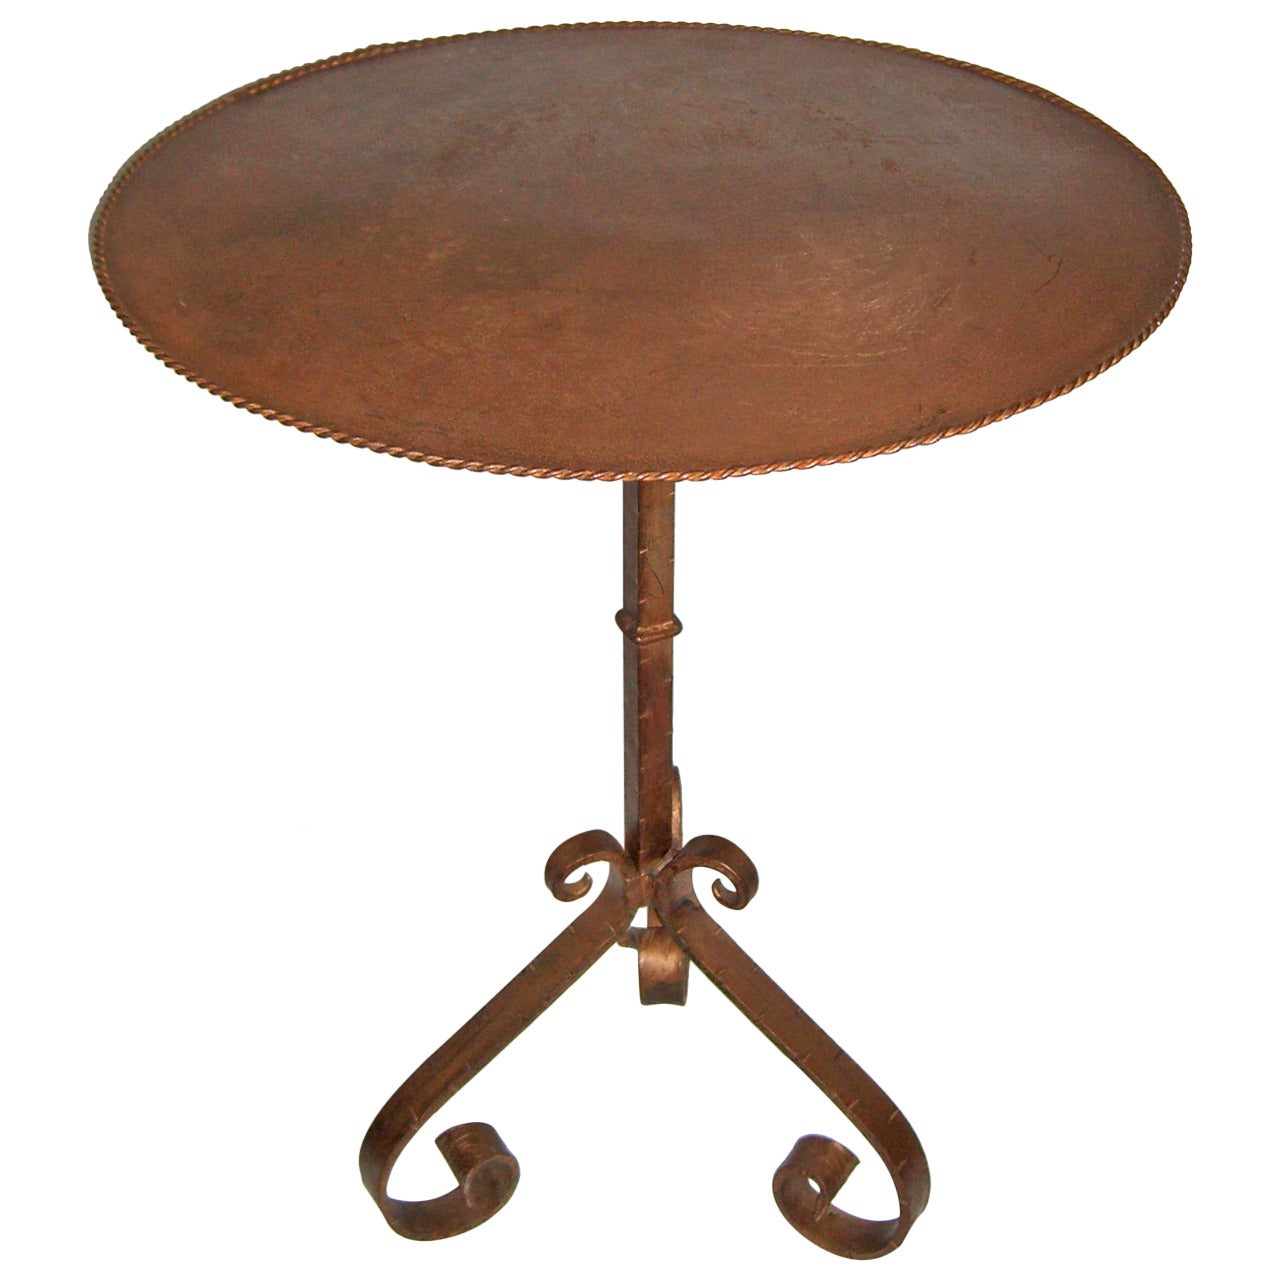 Handcrafted Table with Patinated Metal Top and Antique Iron Candle Stand Base